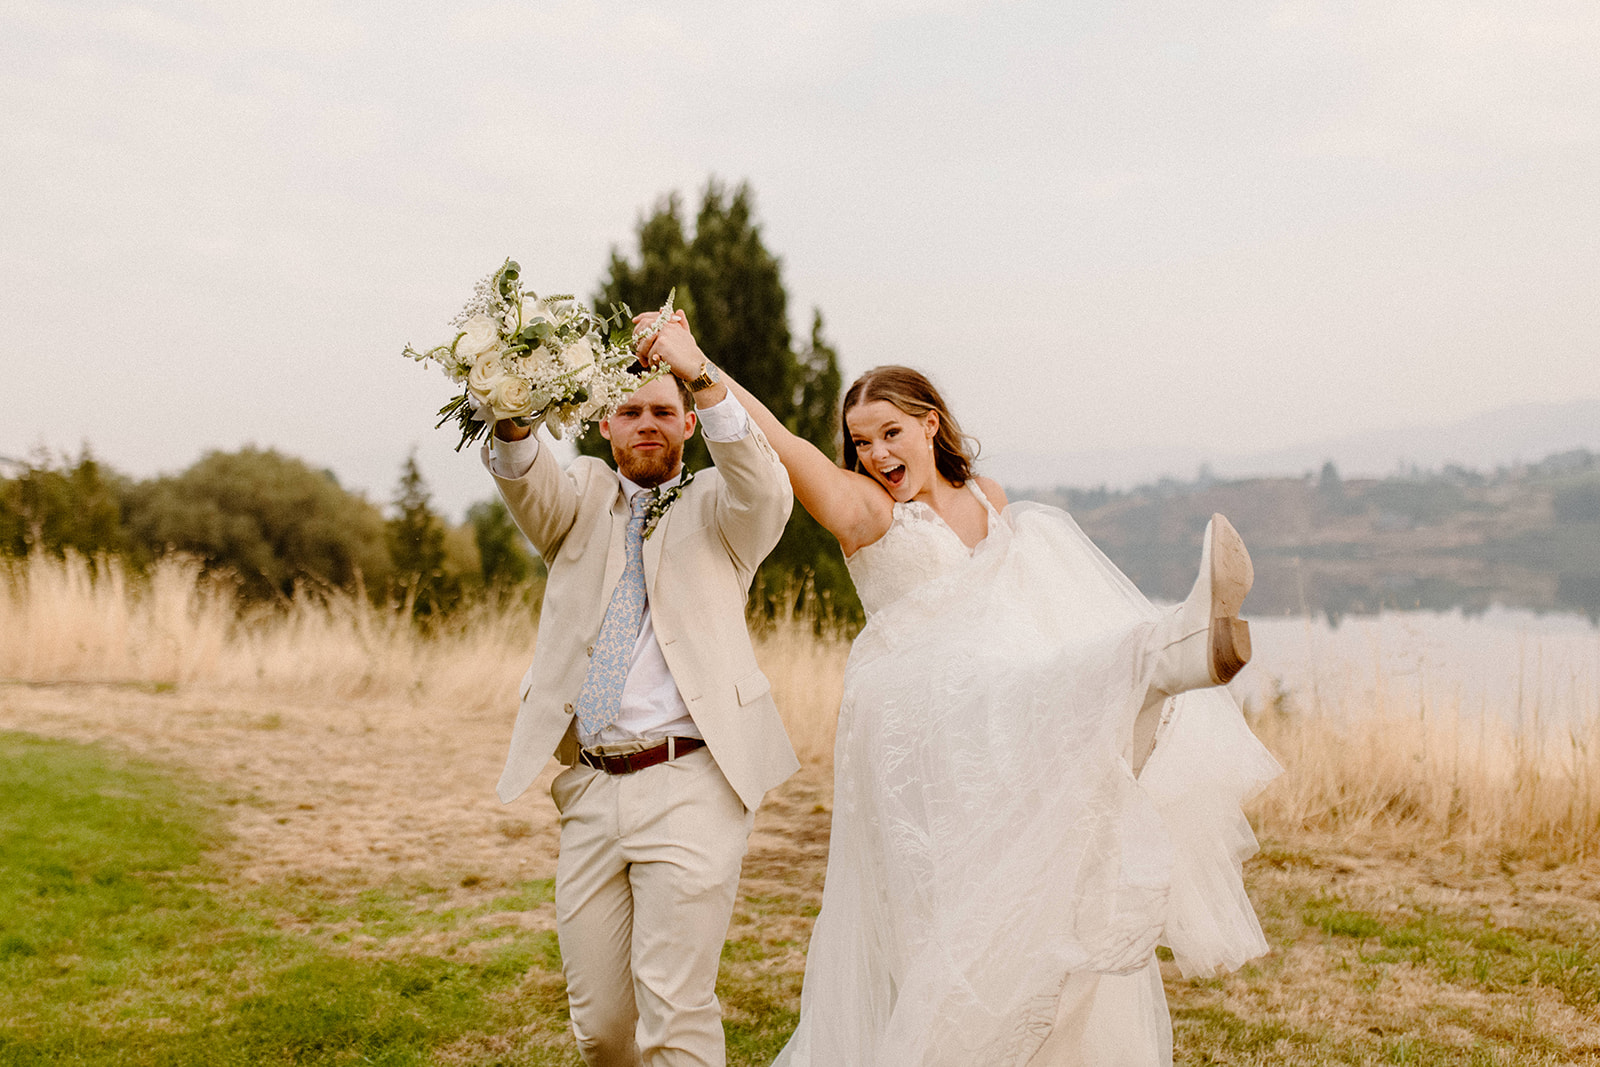 Beautiful Bride and Groom dancing in grass fields